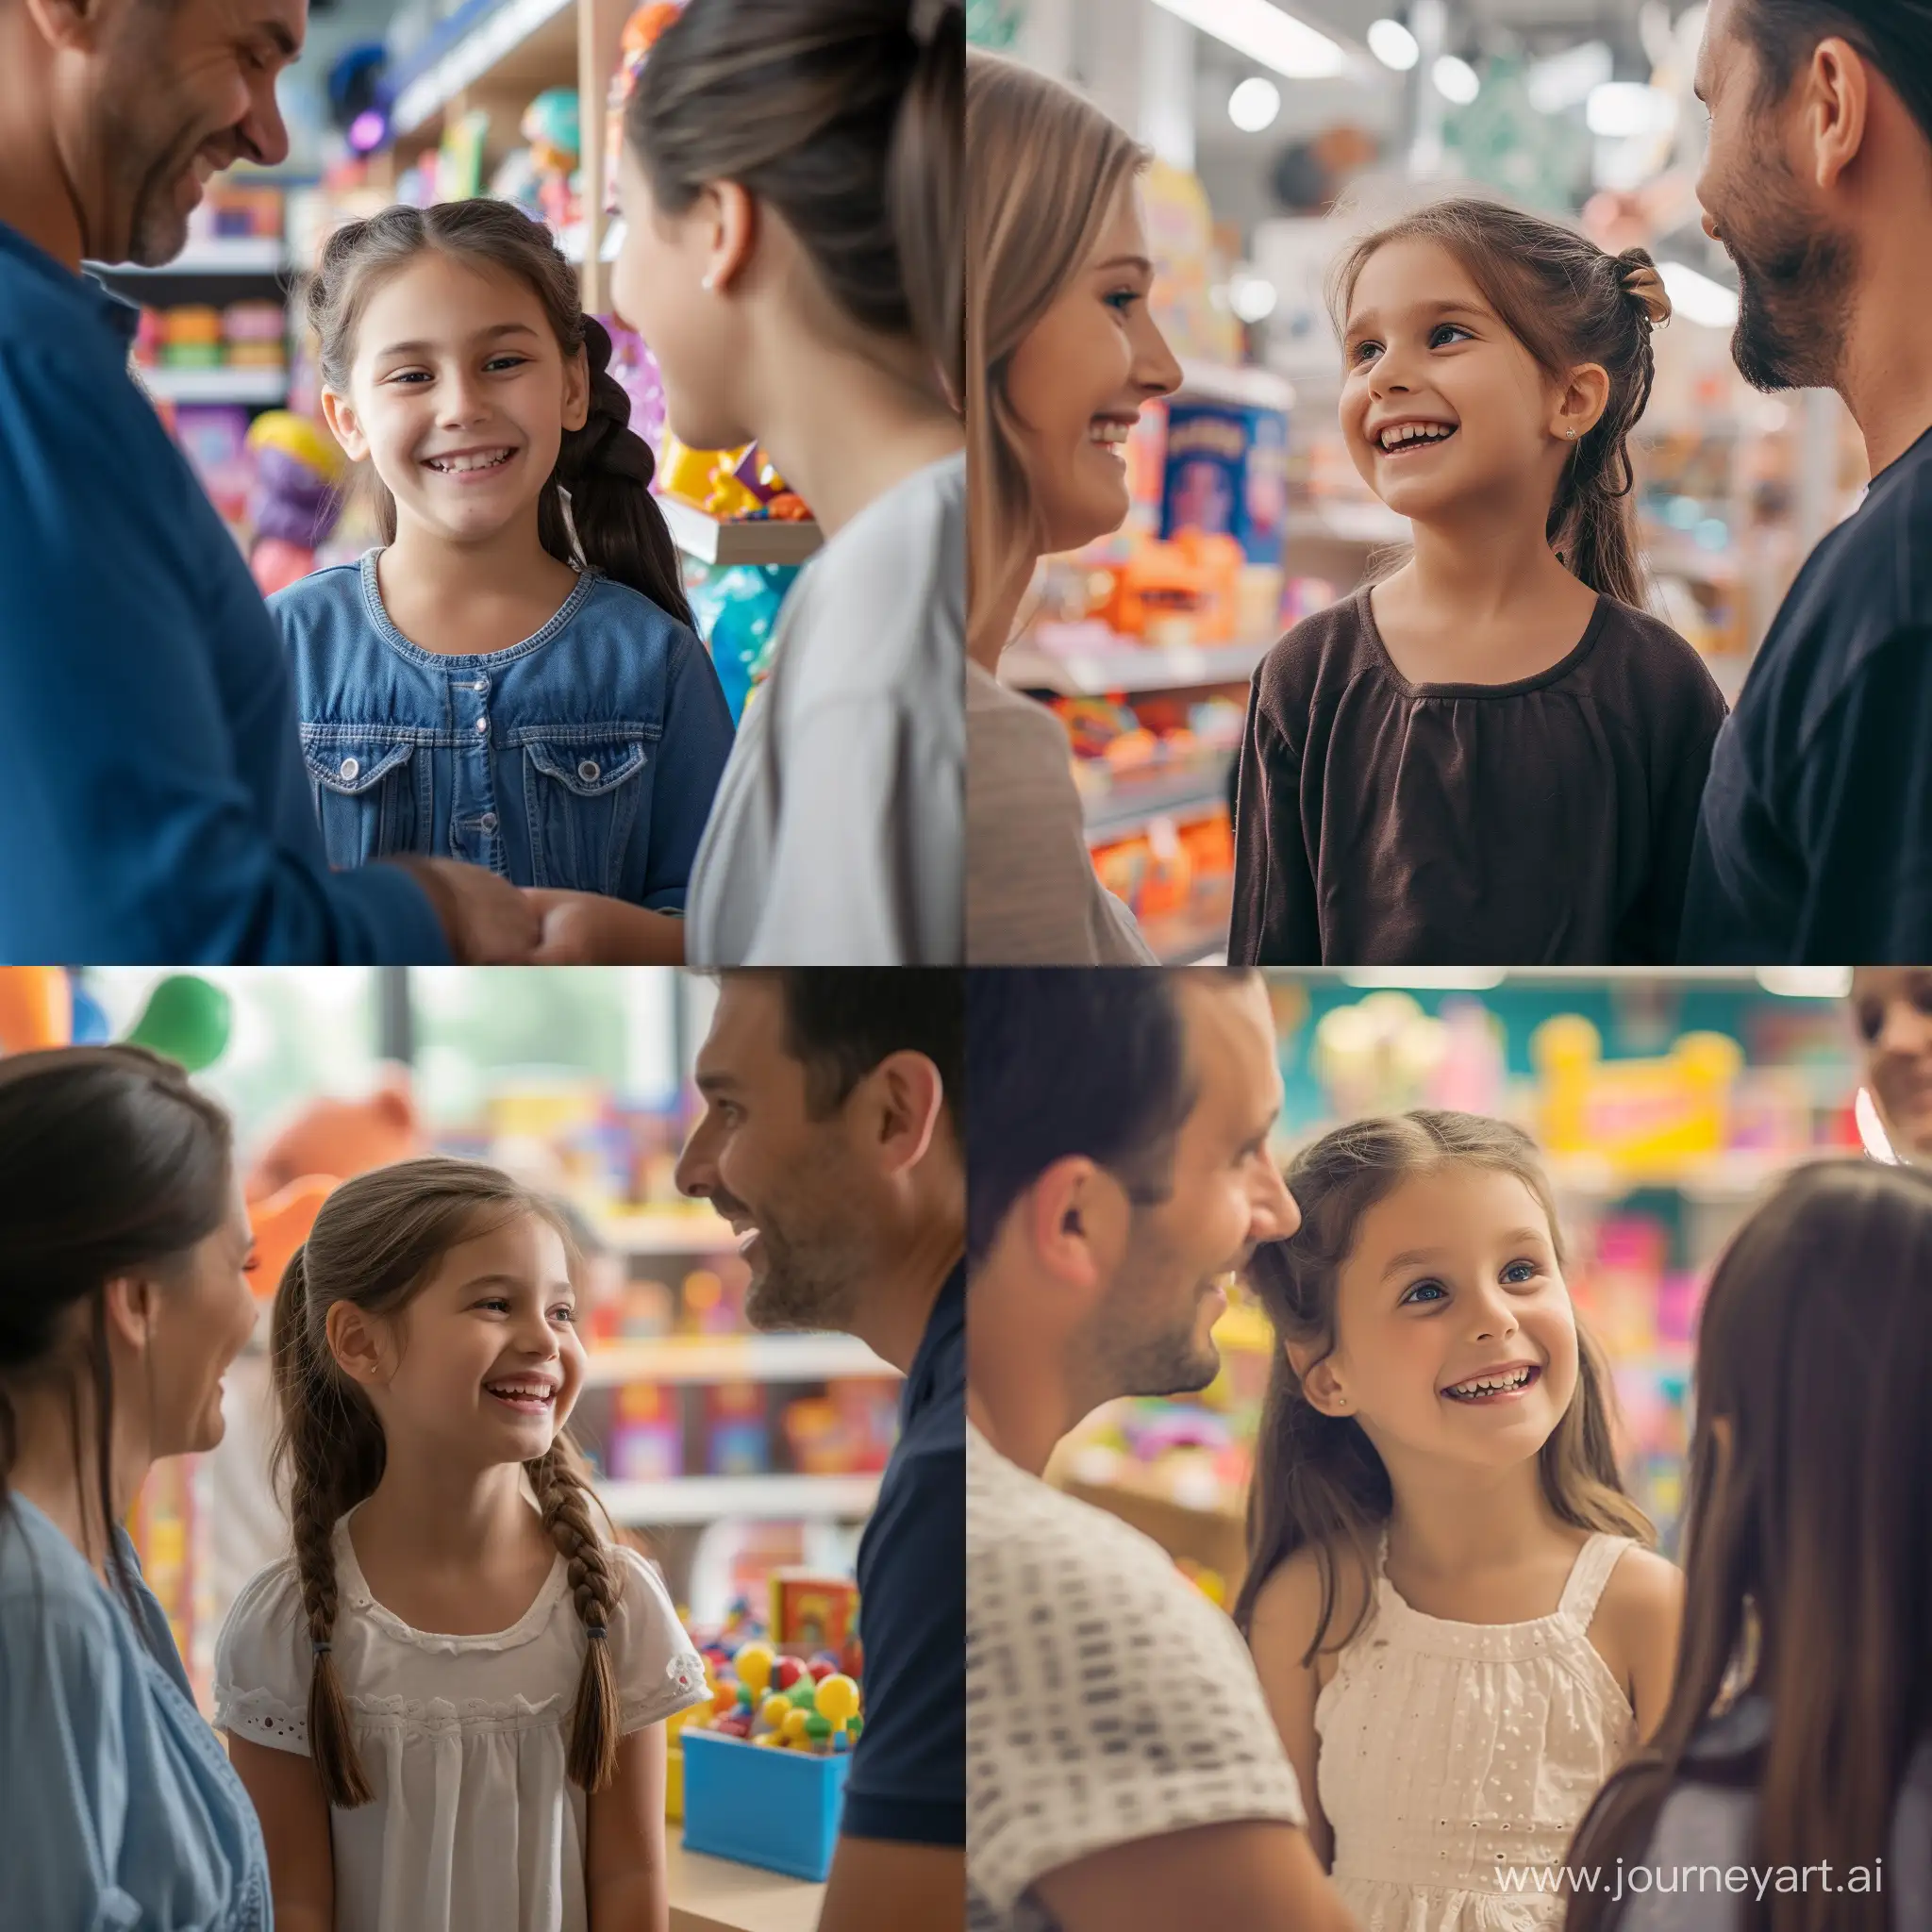 a cute 6 years old girl, going to a toy store with her mom and dad she smiles and is looking at her mom